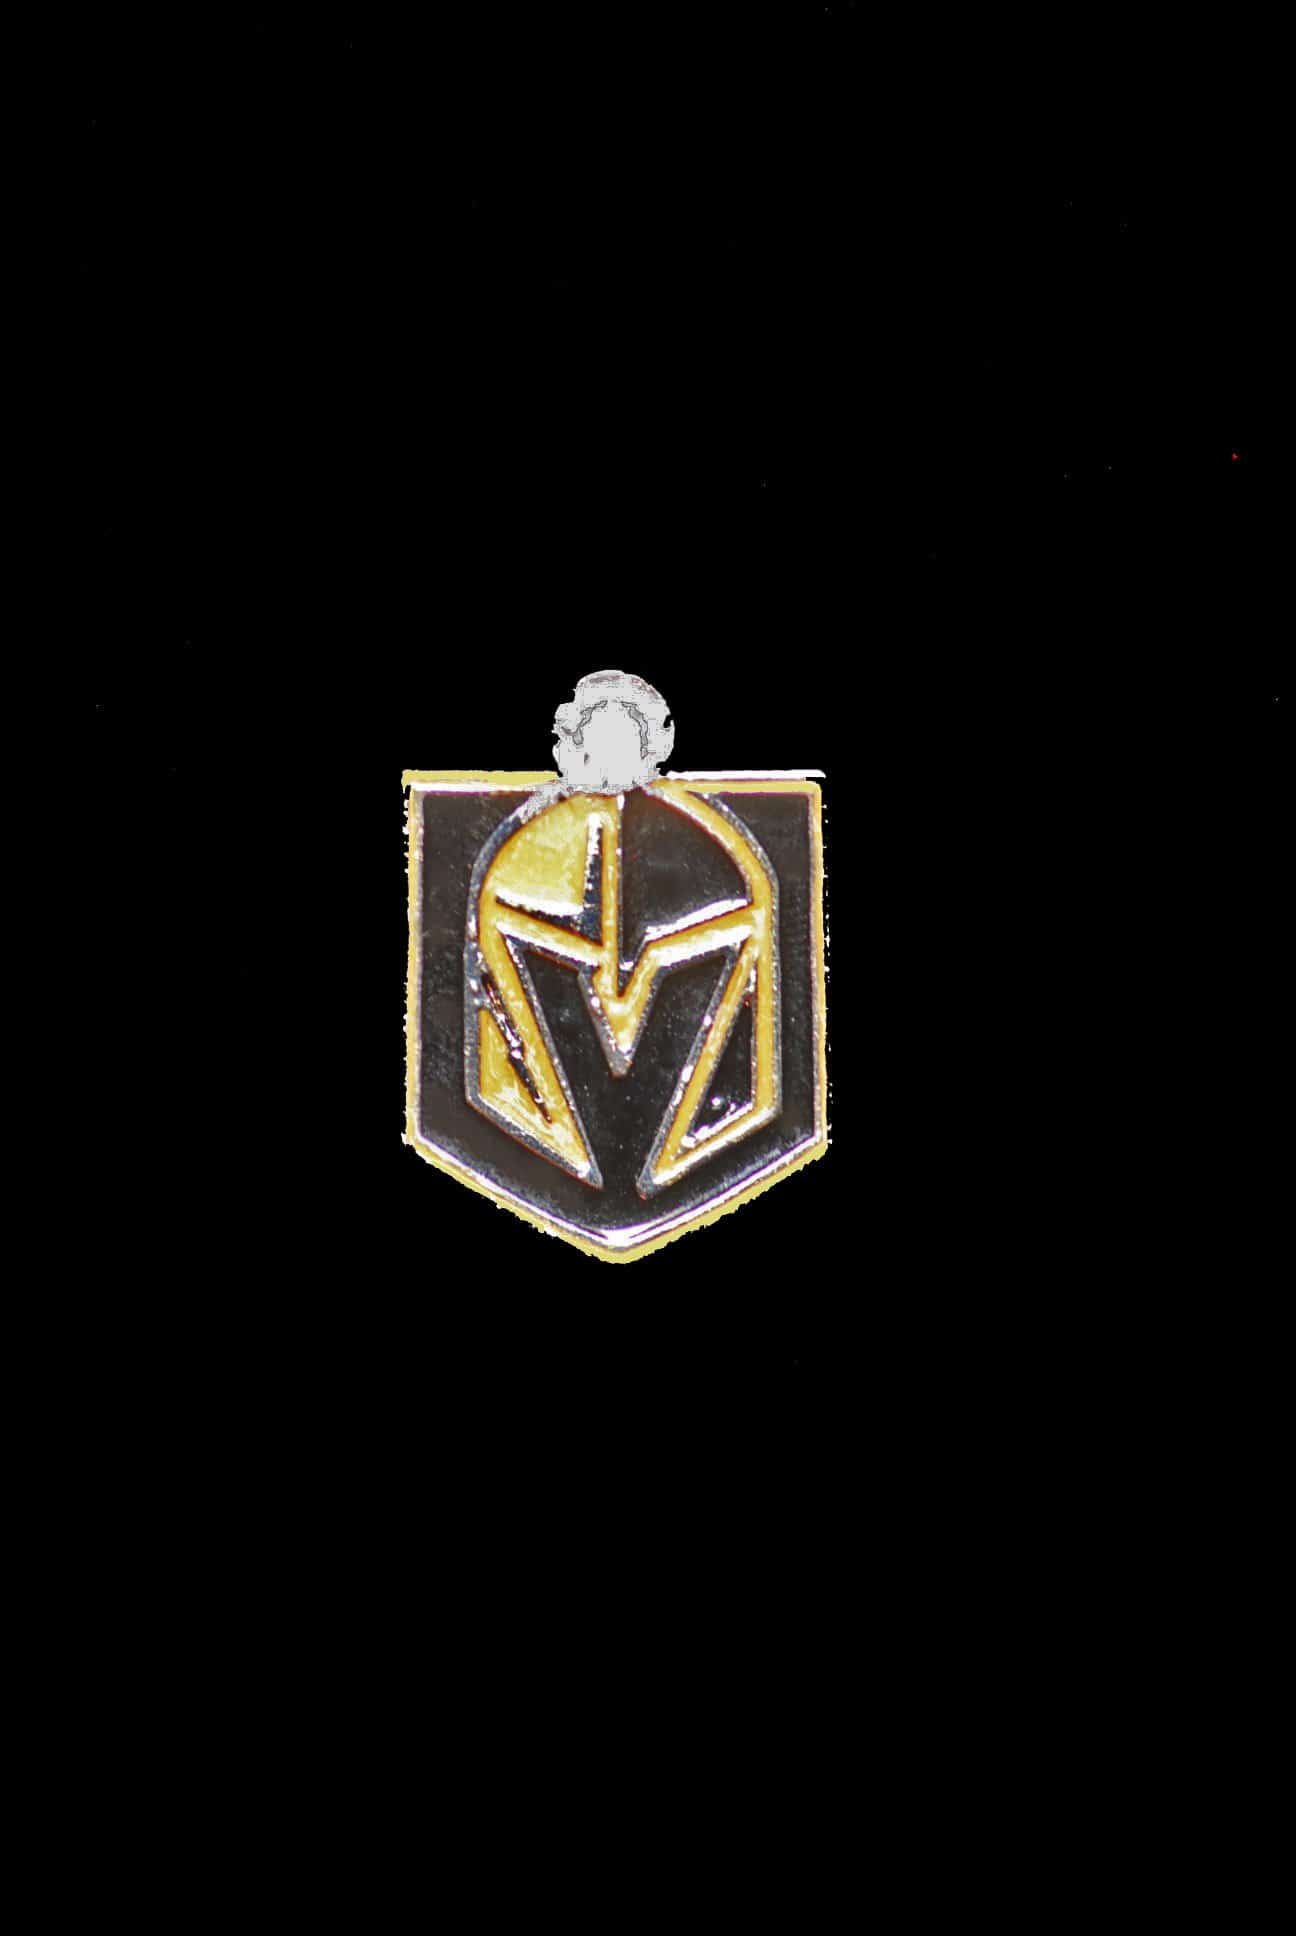 Drinkware F-Traditional LV Golden Knights Logo 7/8 X 5/8 inches Winey Bitches Co Tipsy Sips Las Vegas Golden Knights "Magnetic Bling for your Glass" Many styles to choose from WineyBitchesCo